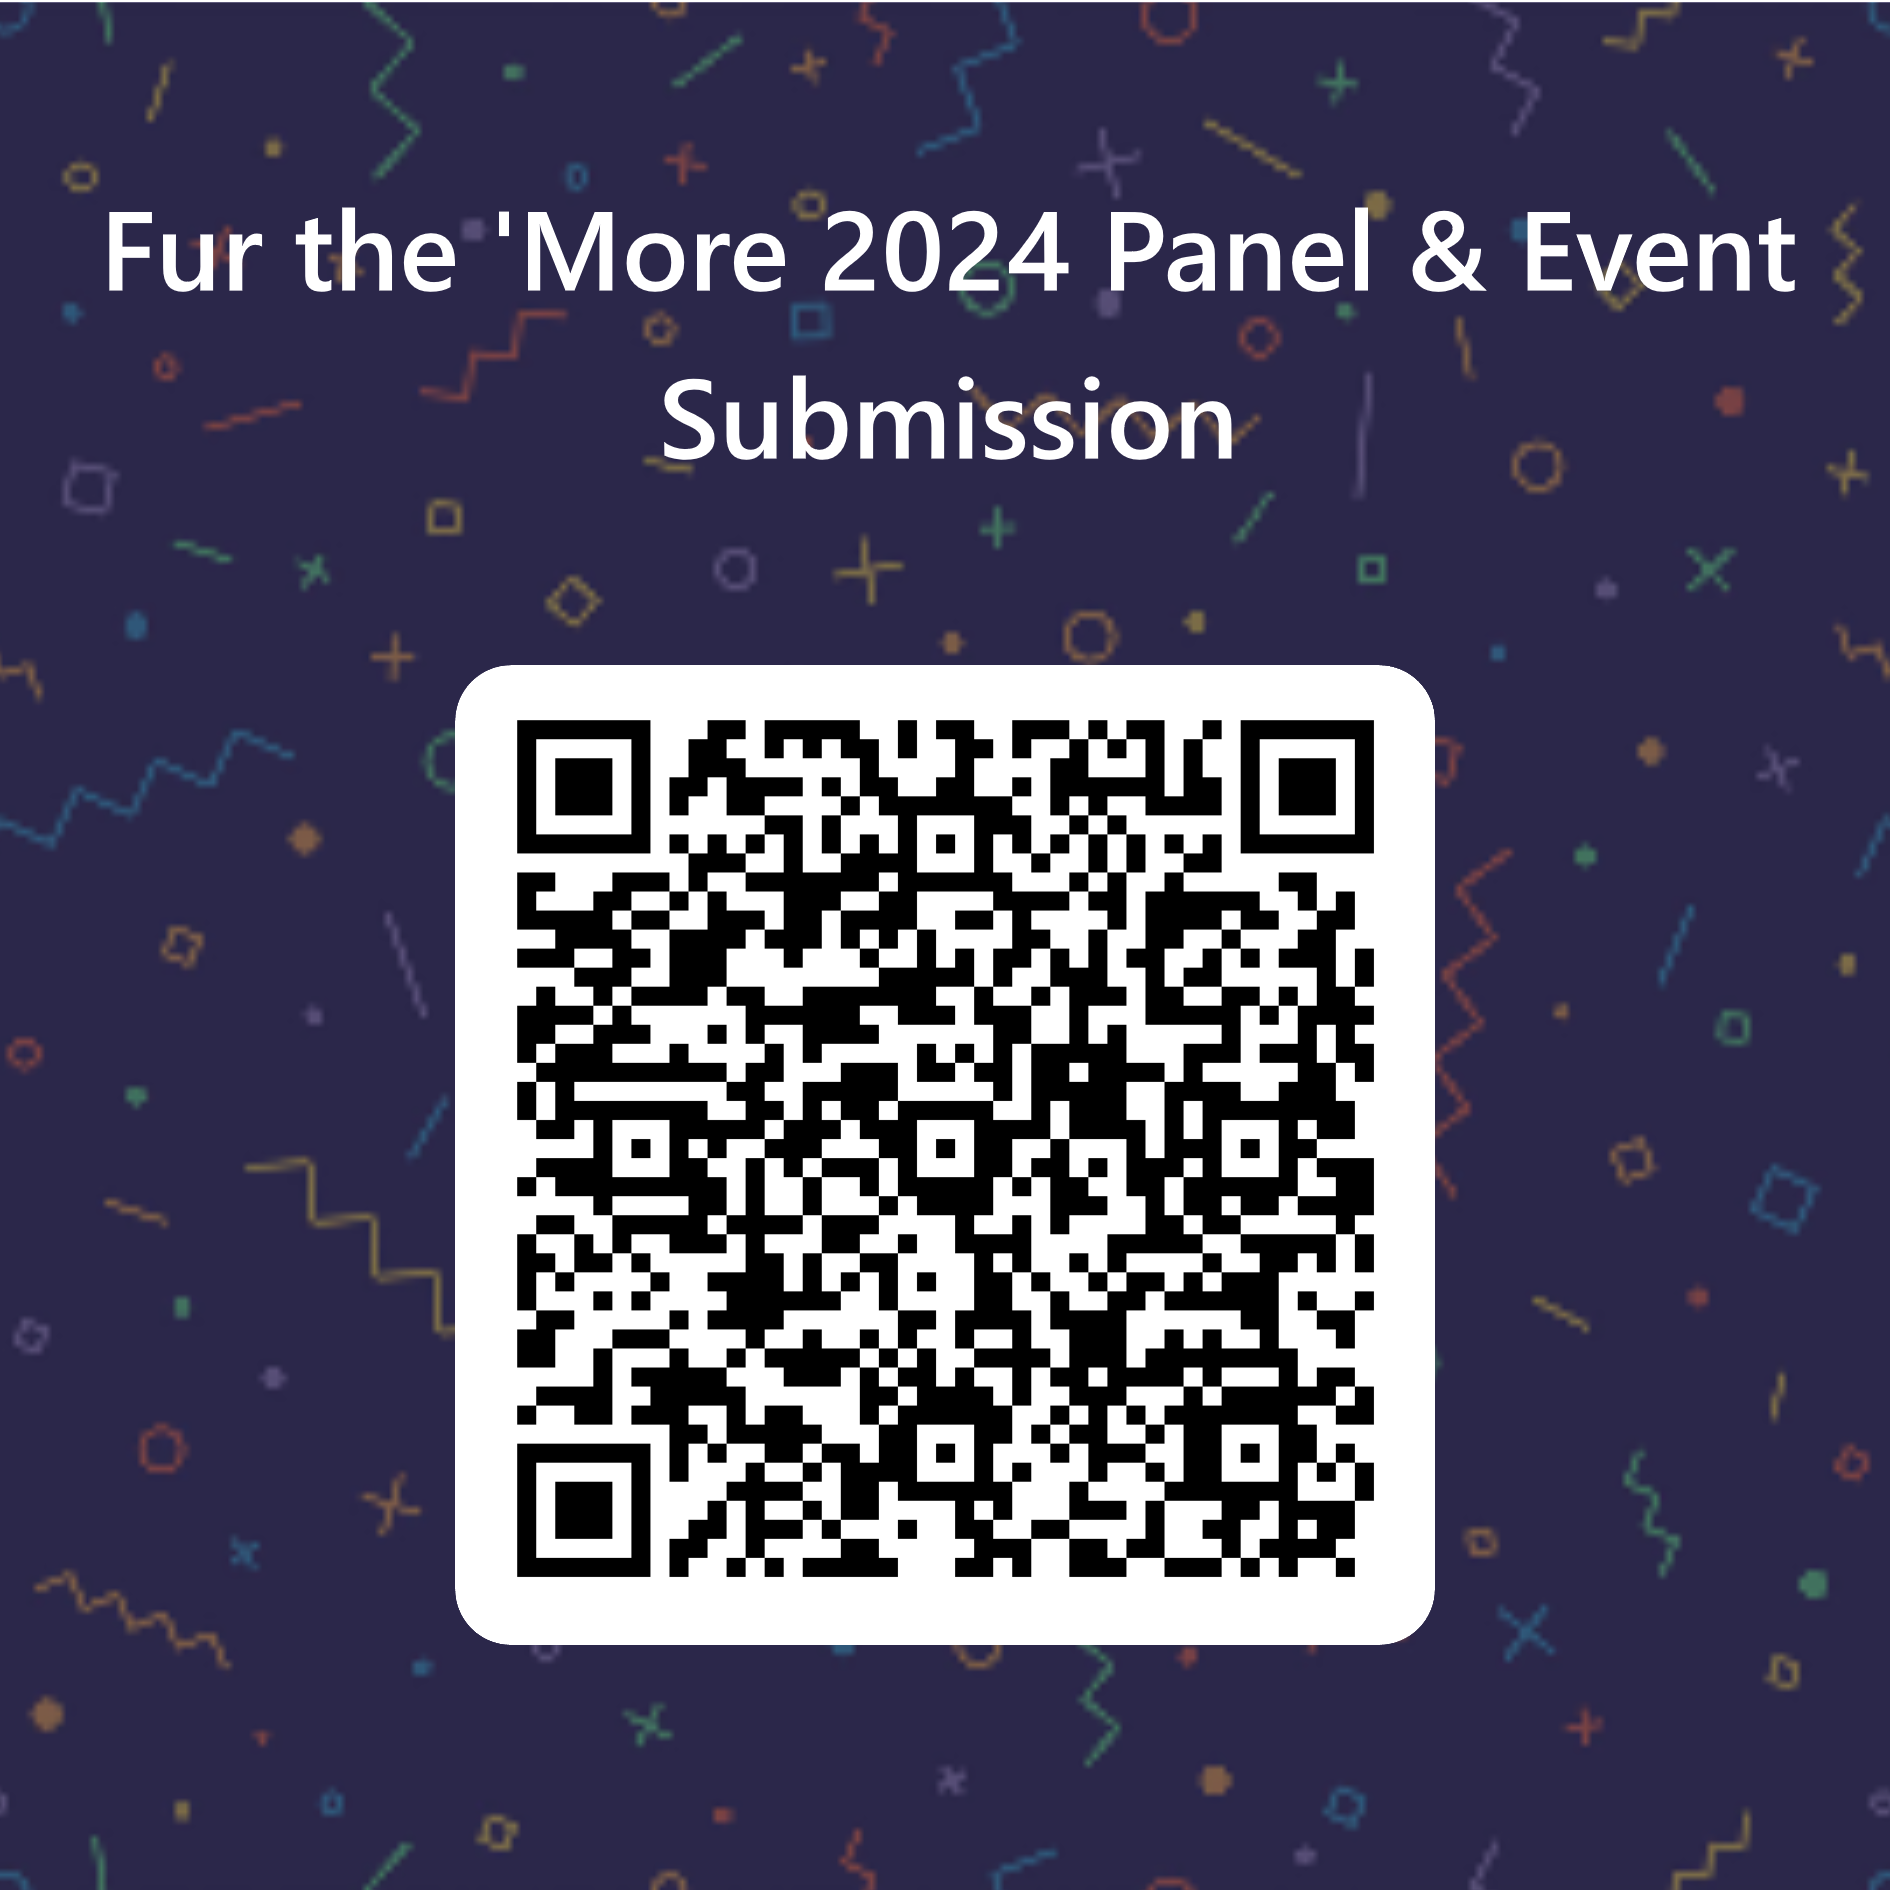 a QR code that is the link mentioned above. the QR text says "Fur the more 2024 panel and event submission"